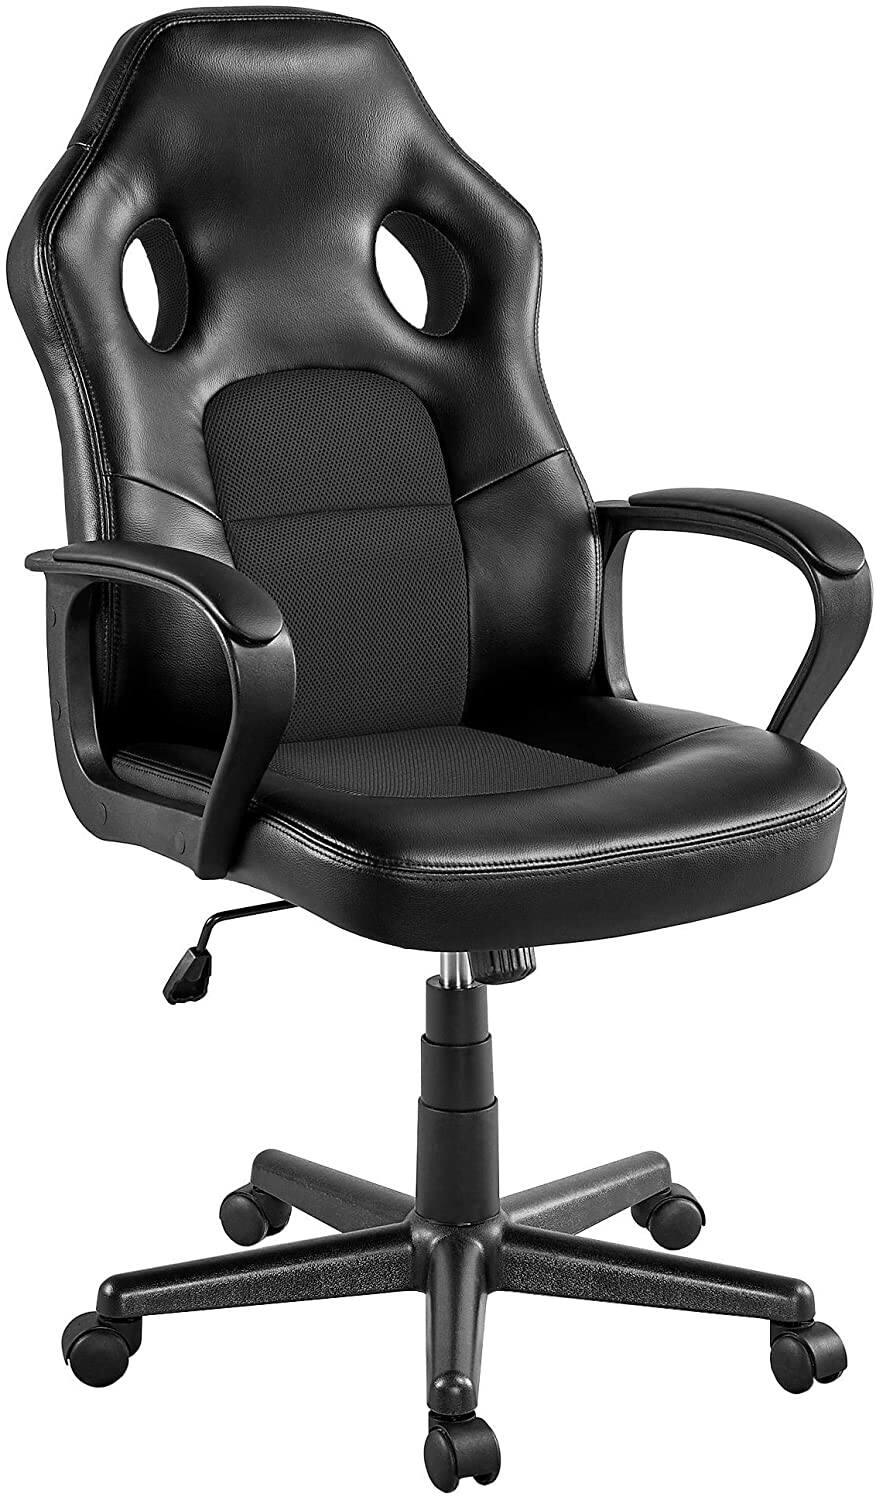 Yaheetech Leather Executive Gaming Office Chairs (Black) ONLY $54.74 AC + Free Shipping